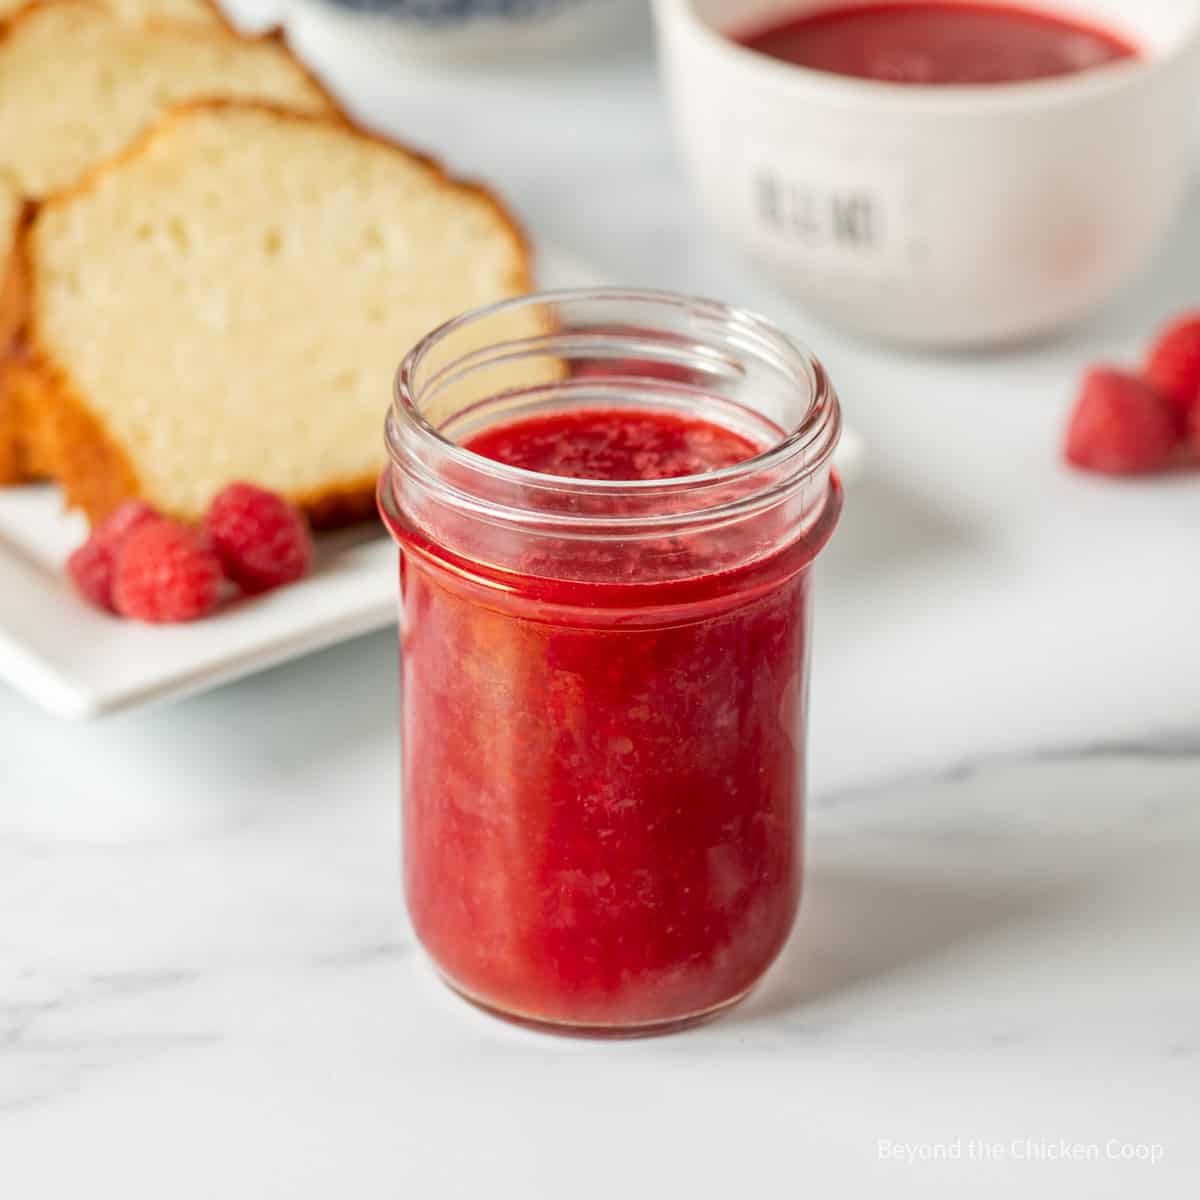 A jar filled with red raspberry sauce.